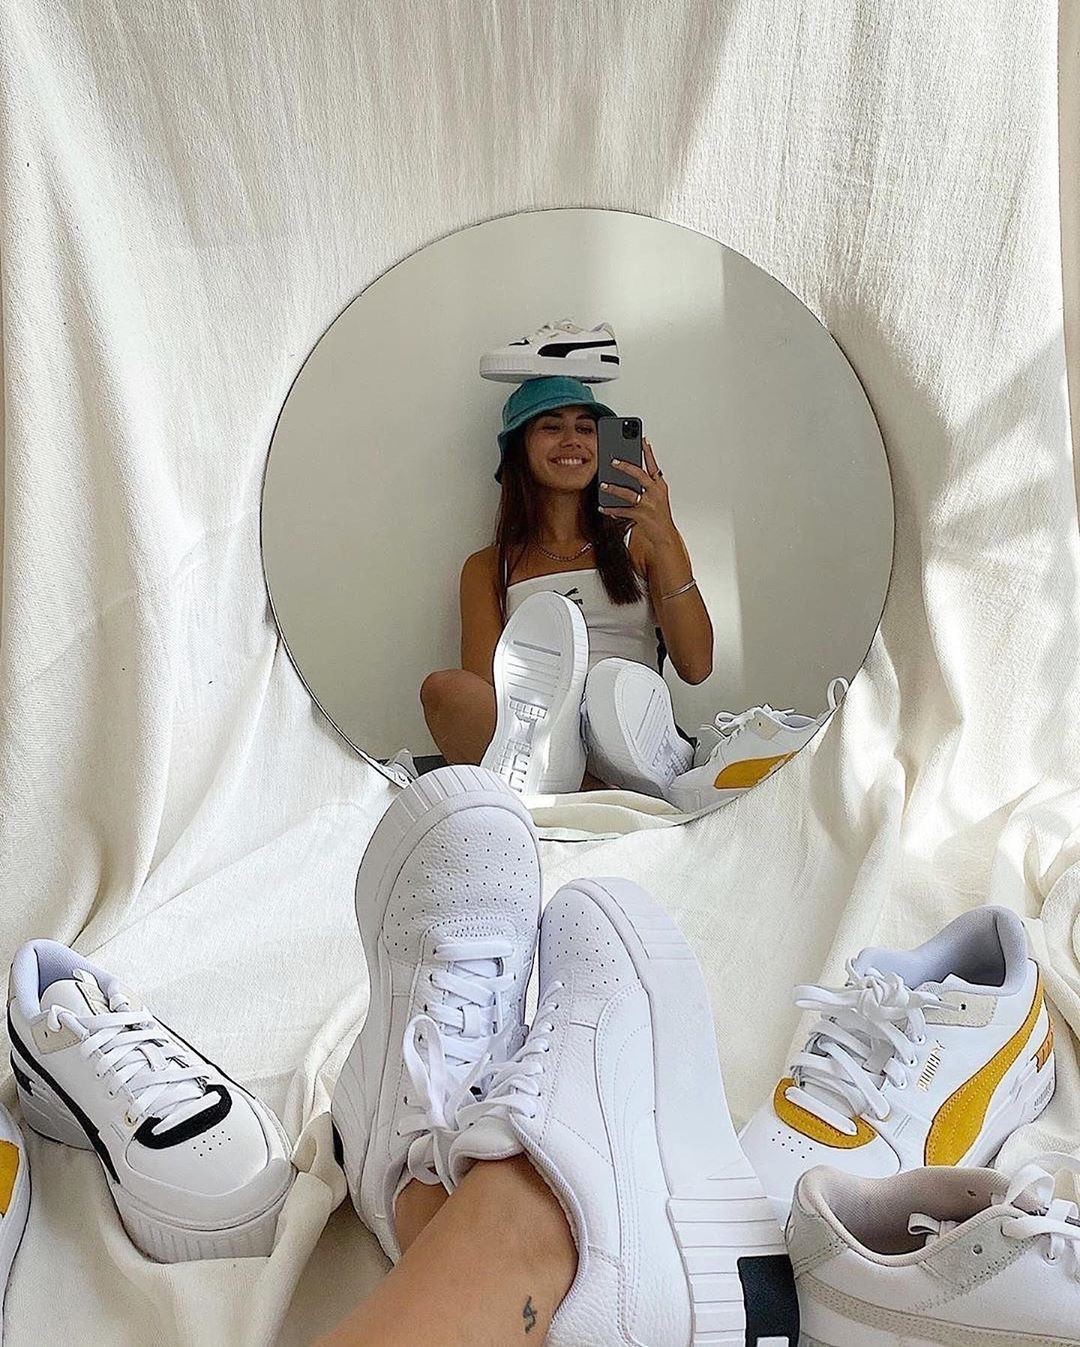 PUMA - Monday? Cali Sport. Tuesday? Cali Wedge. Wednesday? You know where I’m going with this. 
📷: @ariadnatb 
👟: Cali Collection